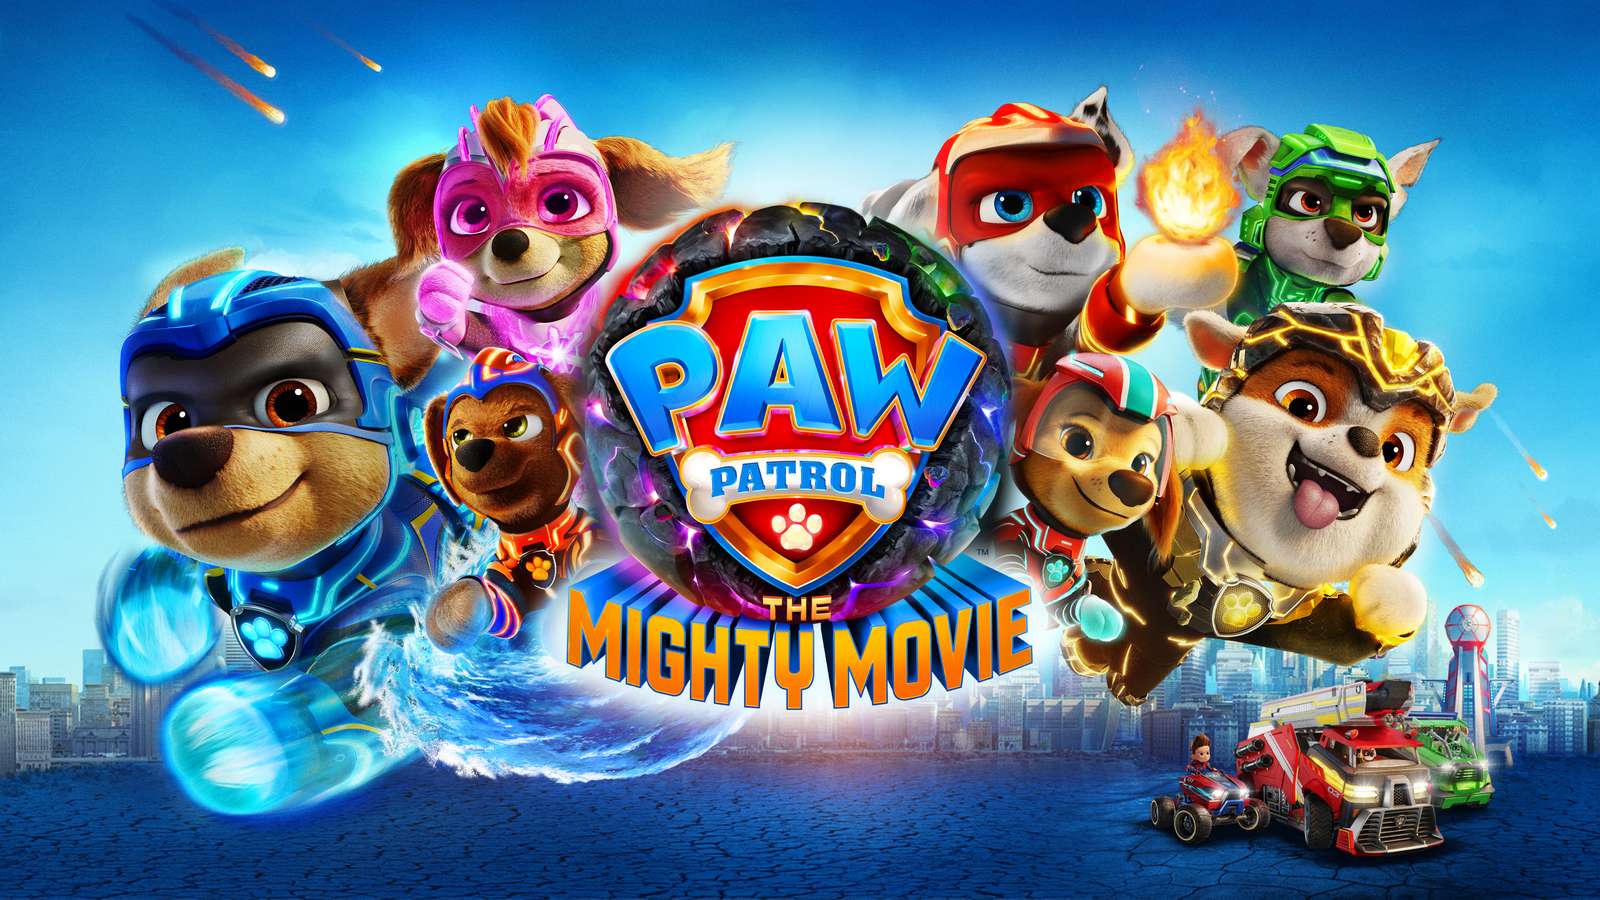 FILM MIGHTTY PAW PATROL puzzle online